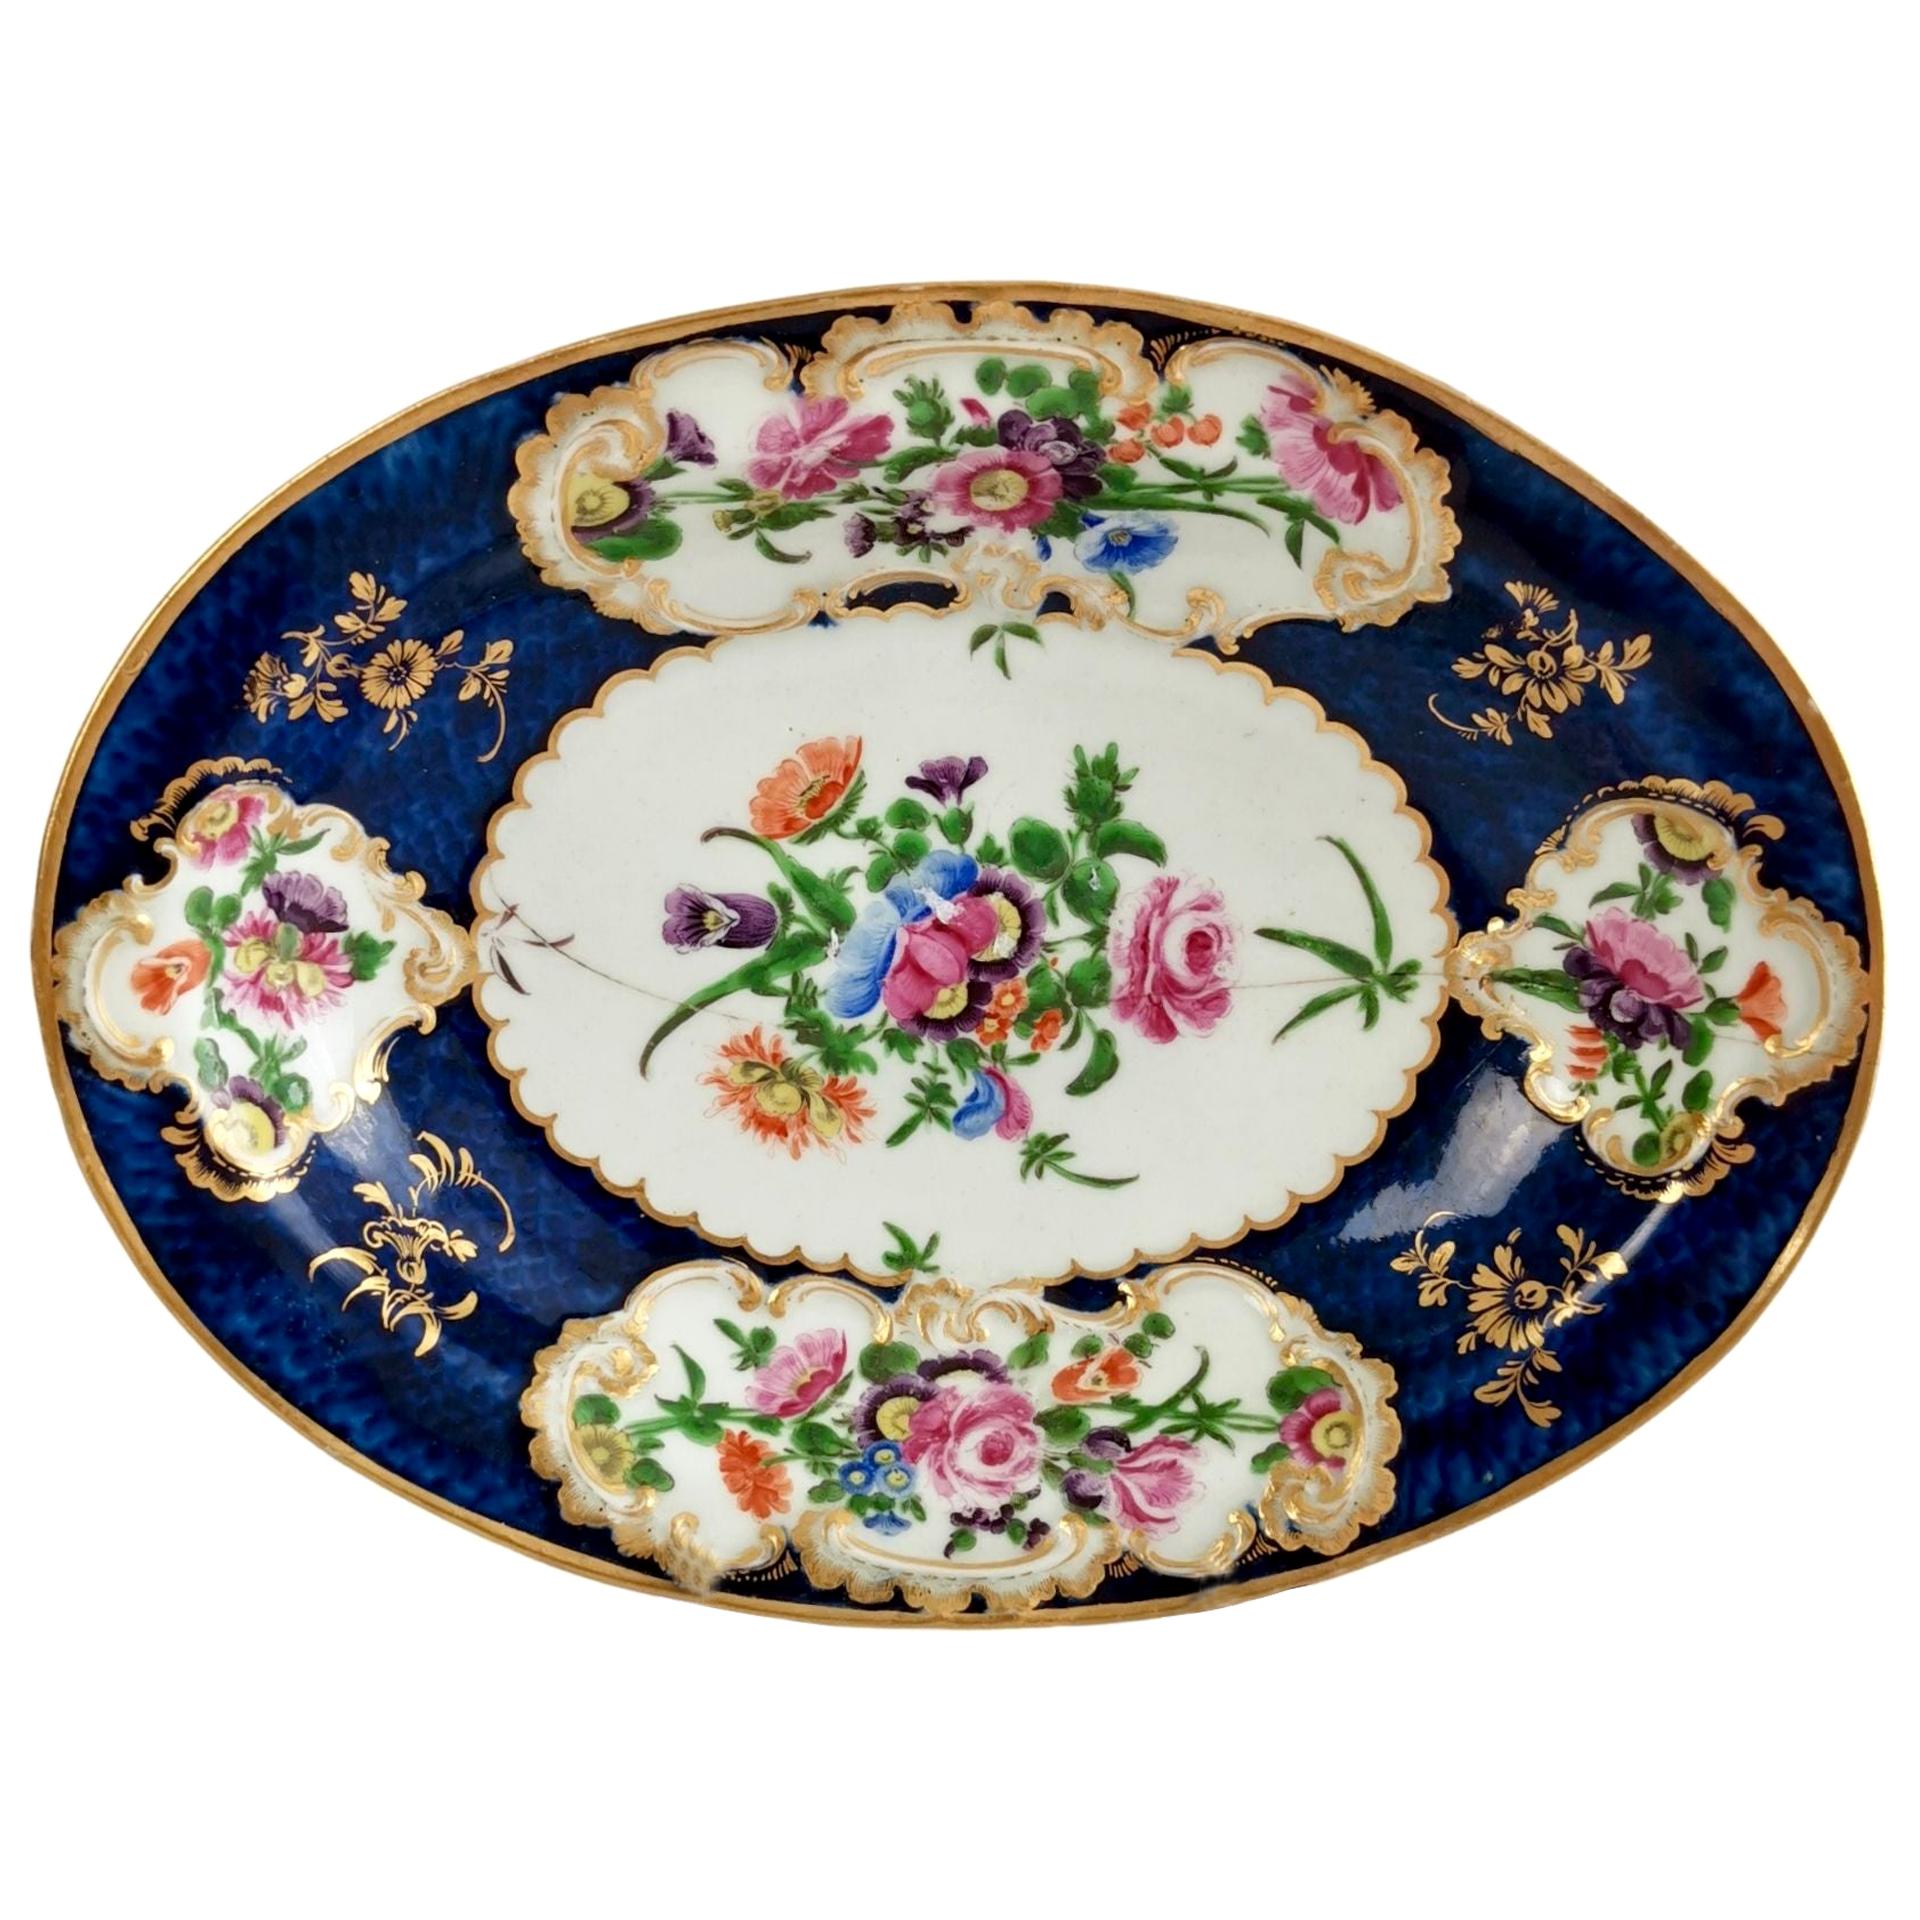 Worcester Oval Dish, Blue Scale with Flower Reserves, 19th Century, 1765-1770